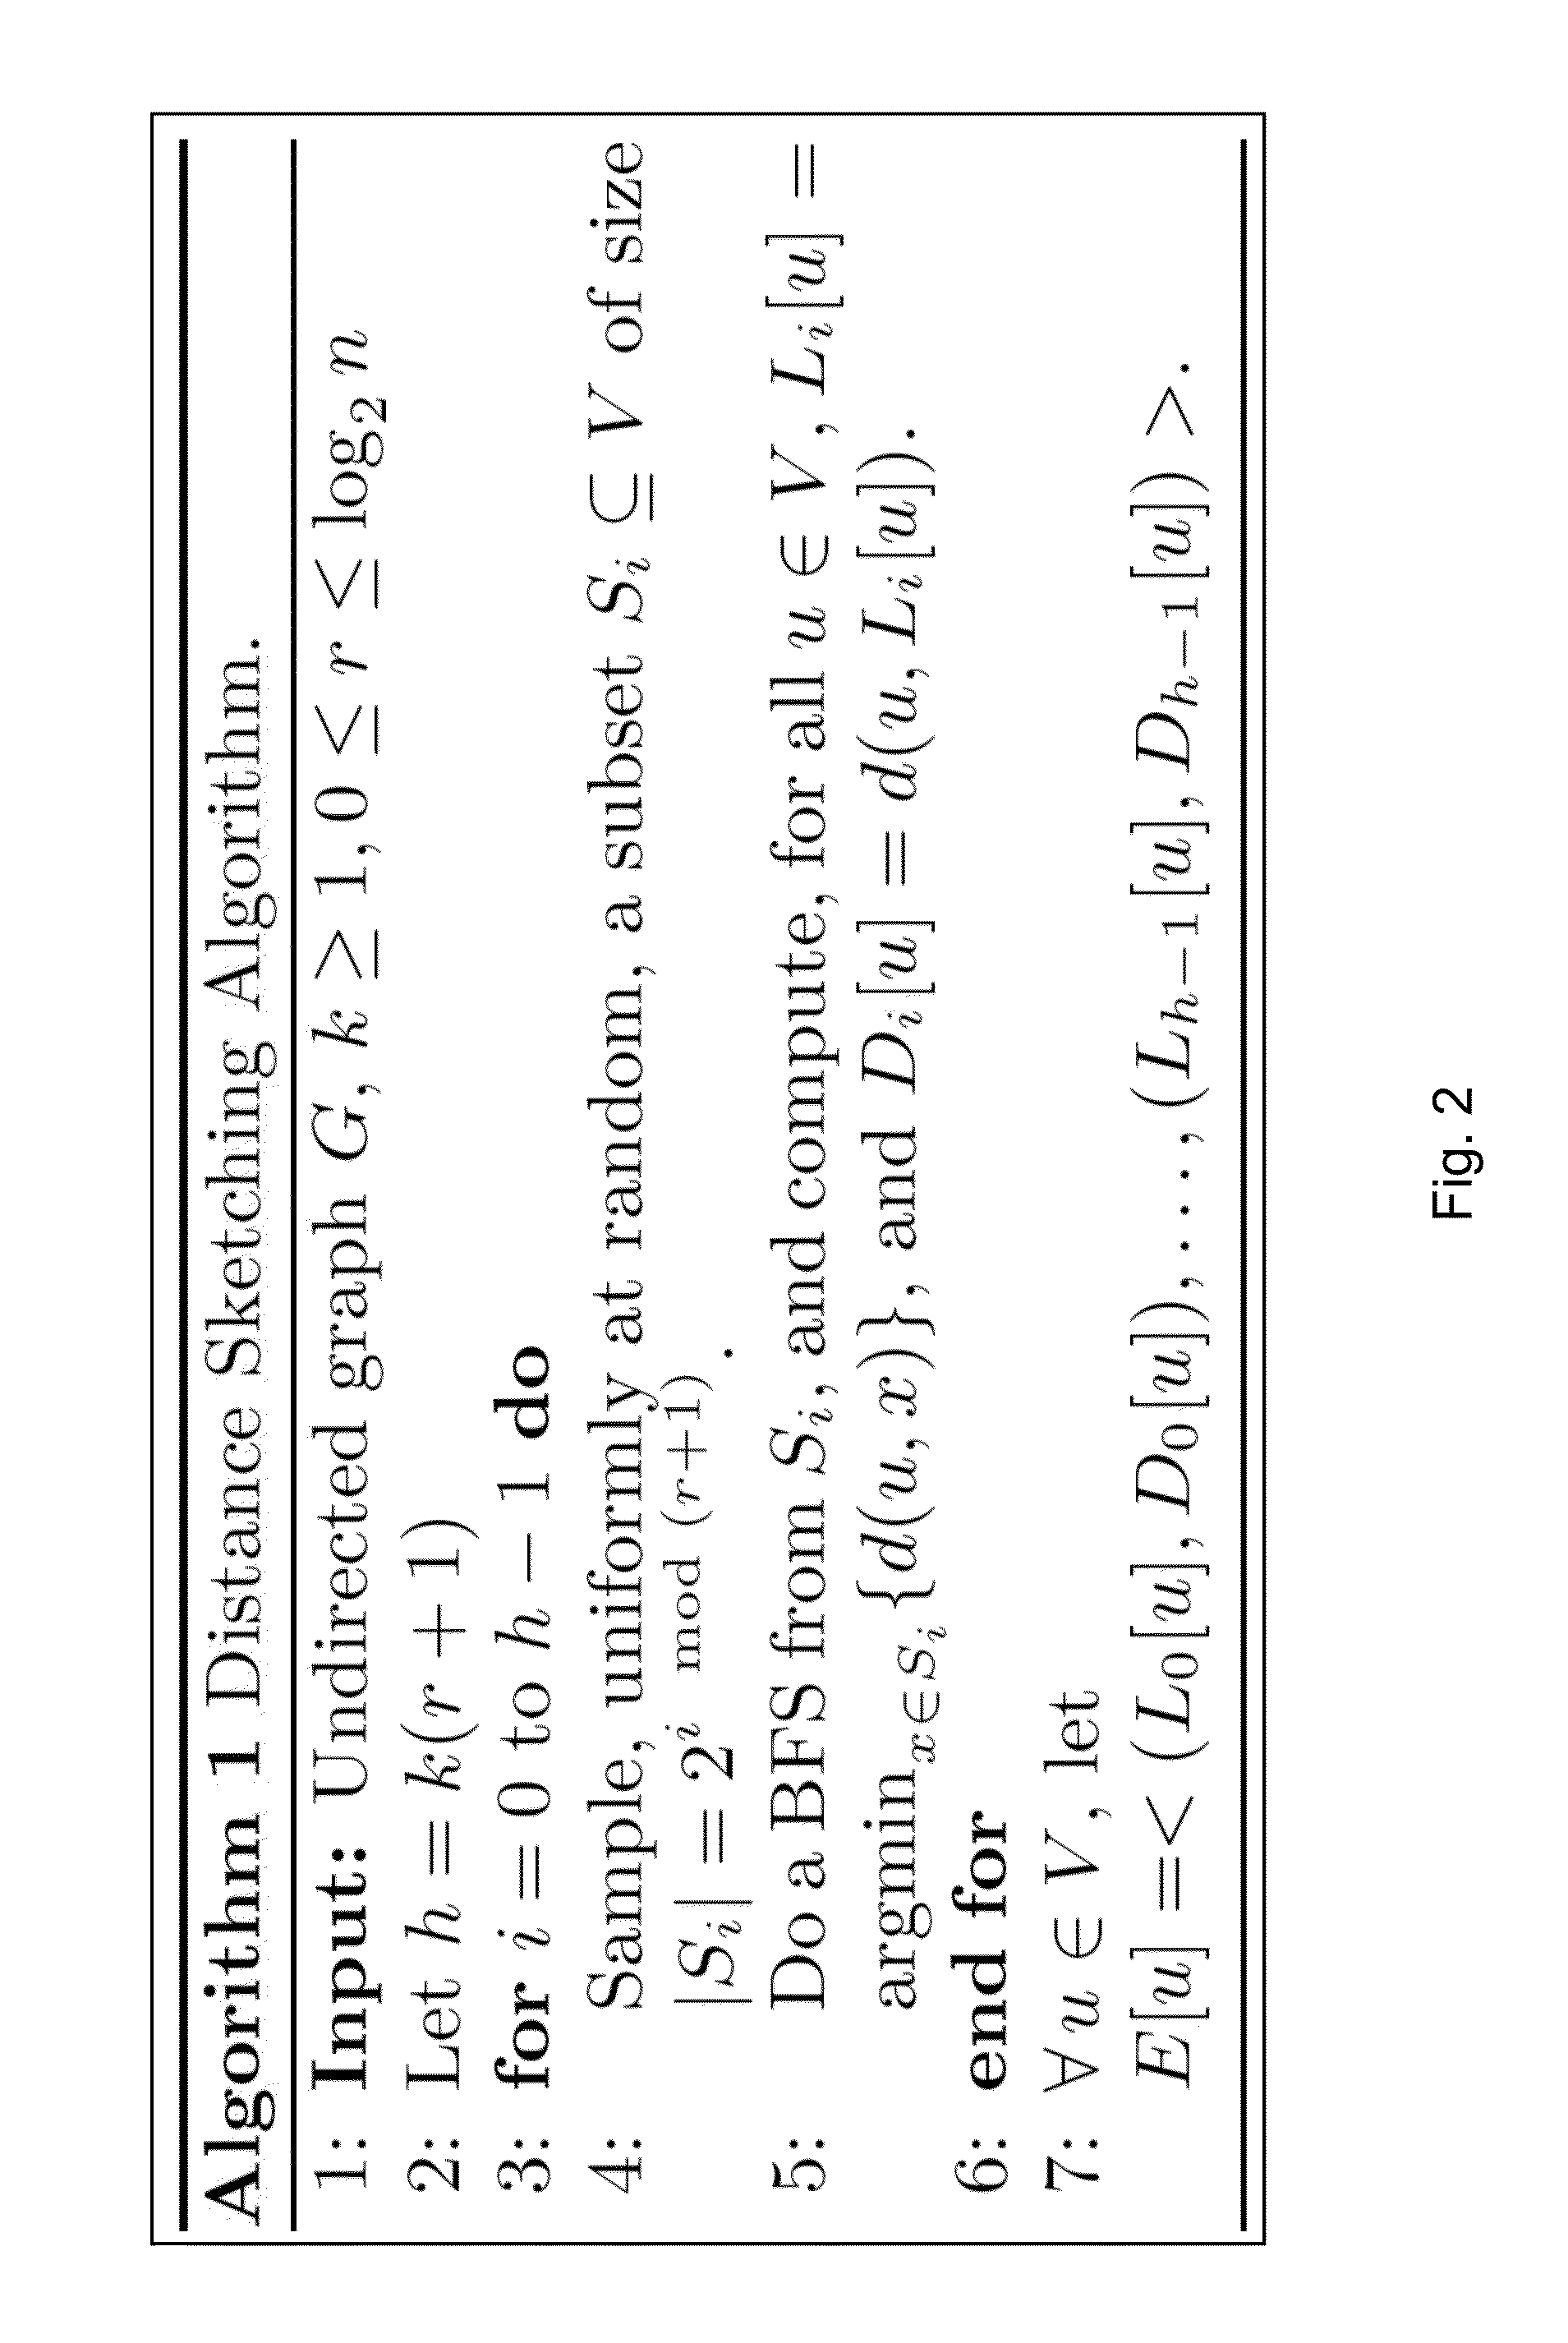 Method and System for Efficient Large-Scale Social Search